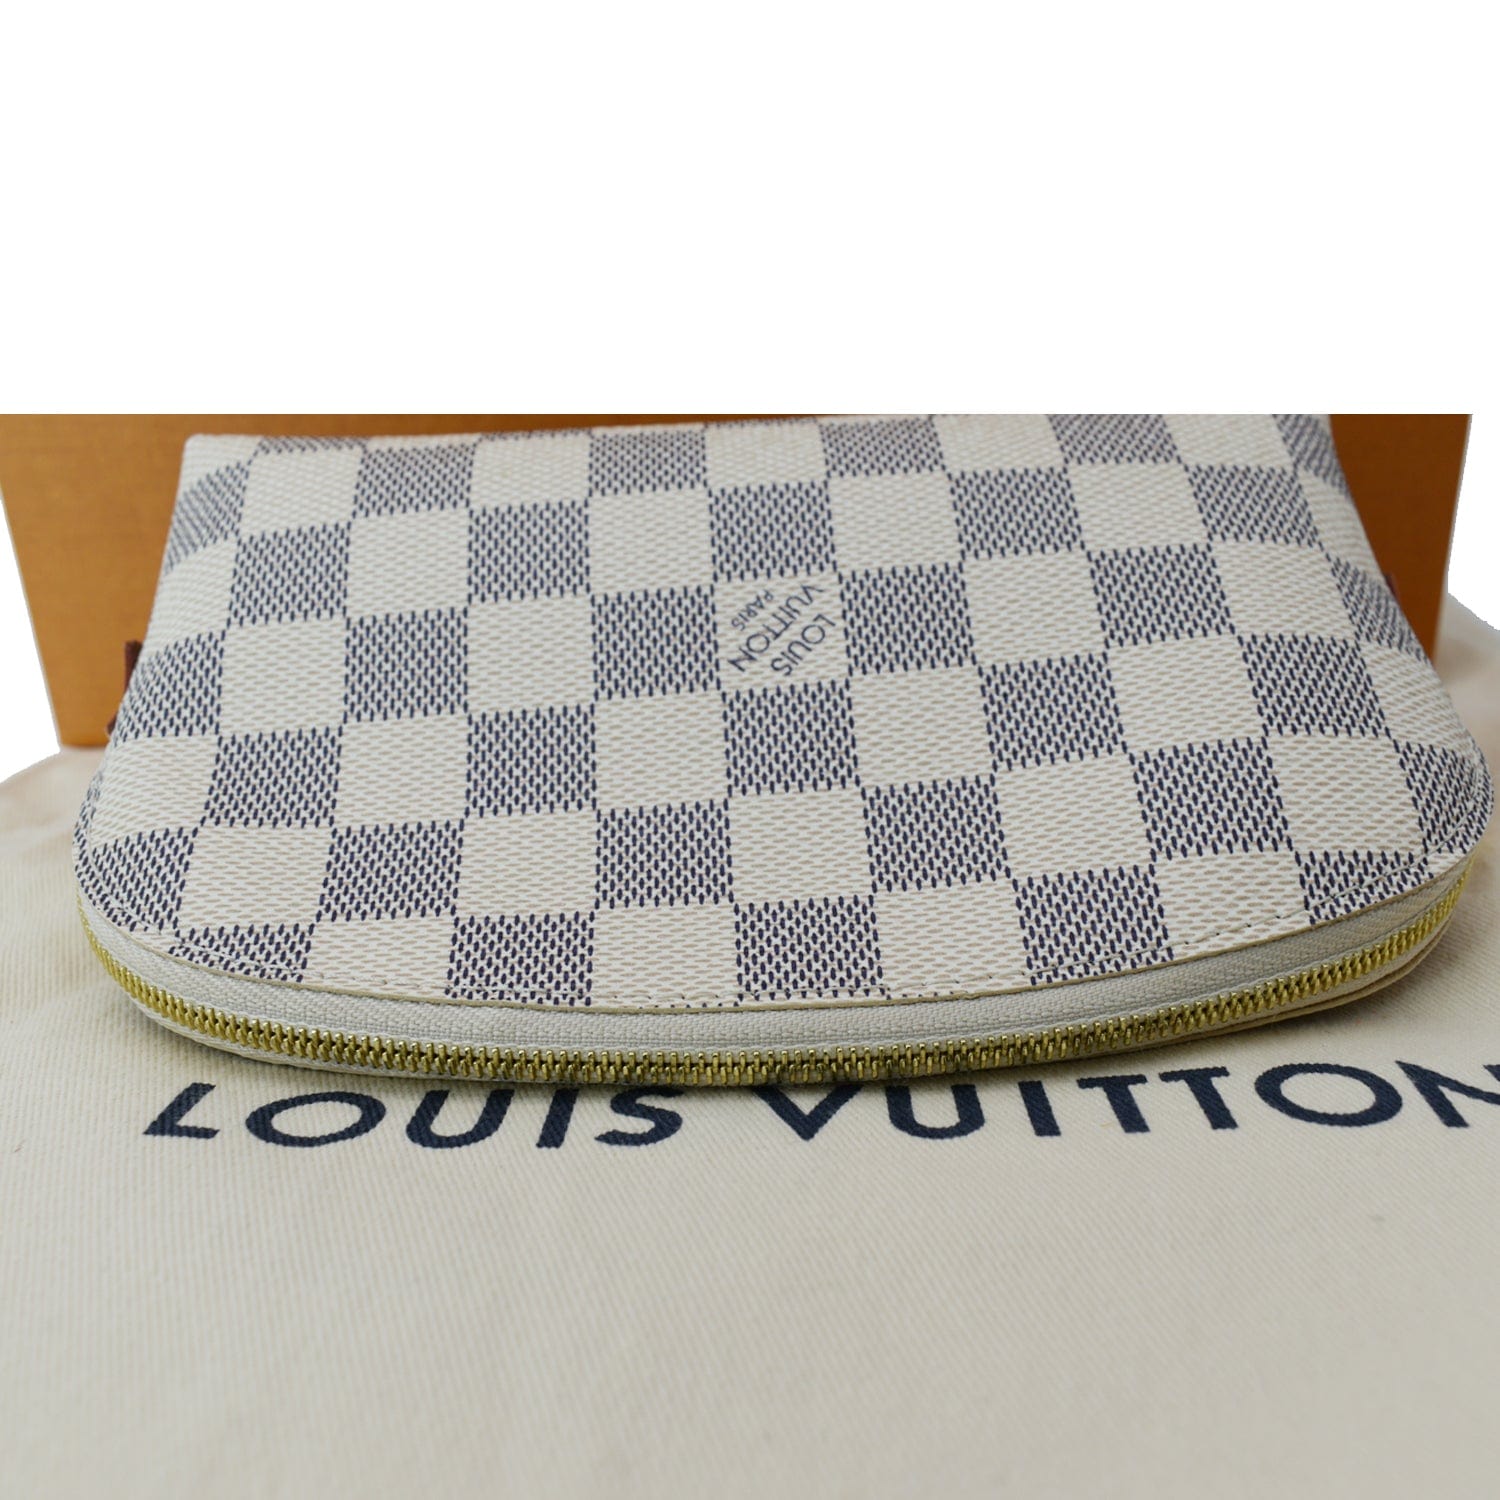 ❤️POCHETTE ACCESSORIES DAMIER AZUR ❤️ BRAND NEW MADE IN FRANCE Rm26000